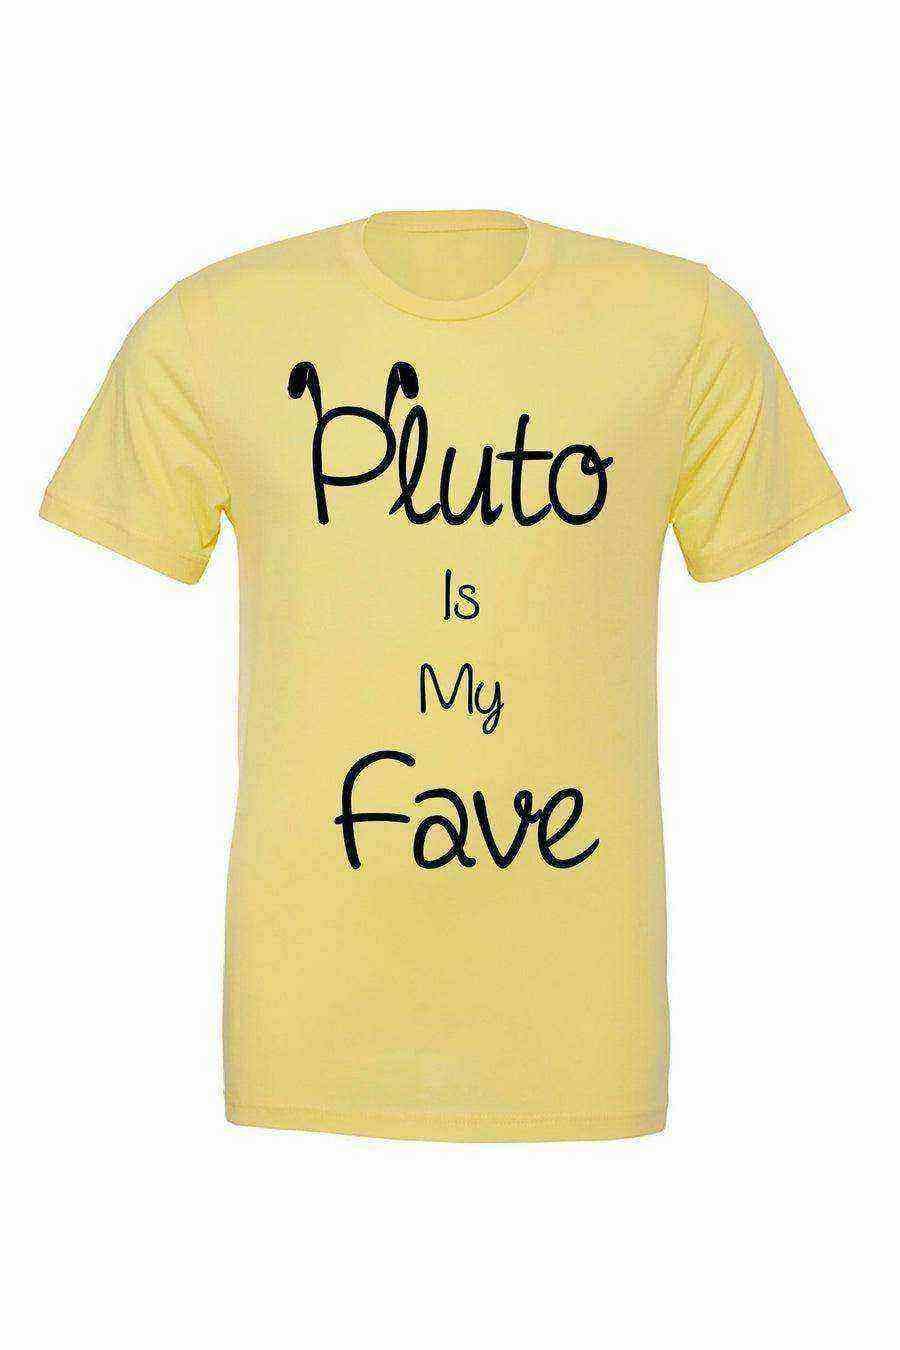 Youth | Pluto is my Fave Shirt - Dylan's Tees